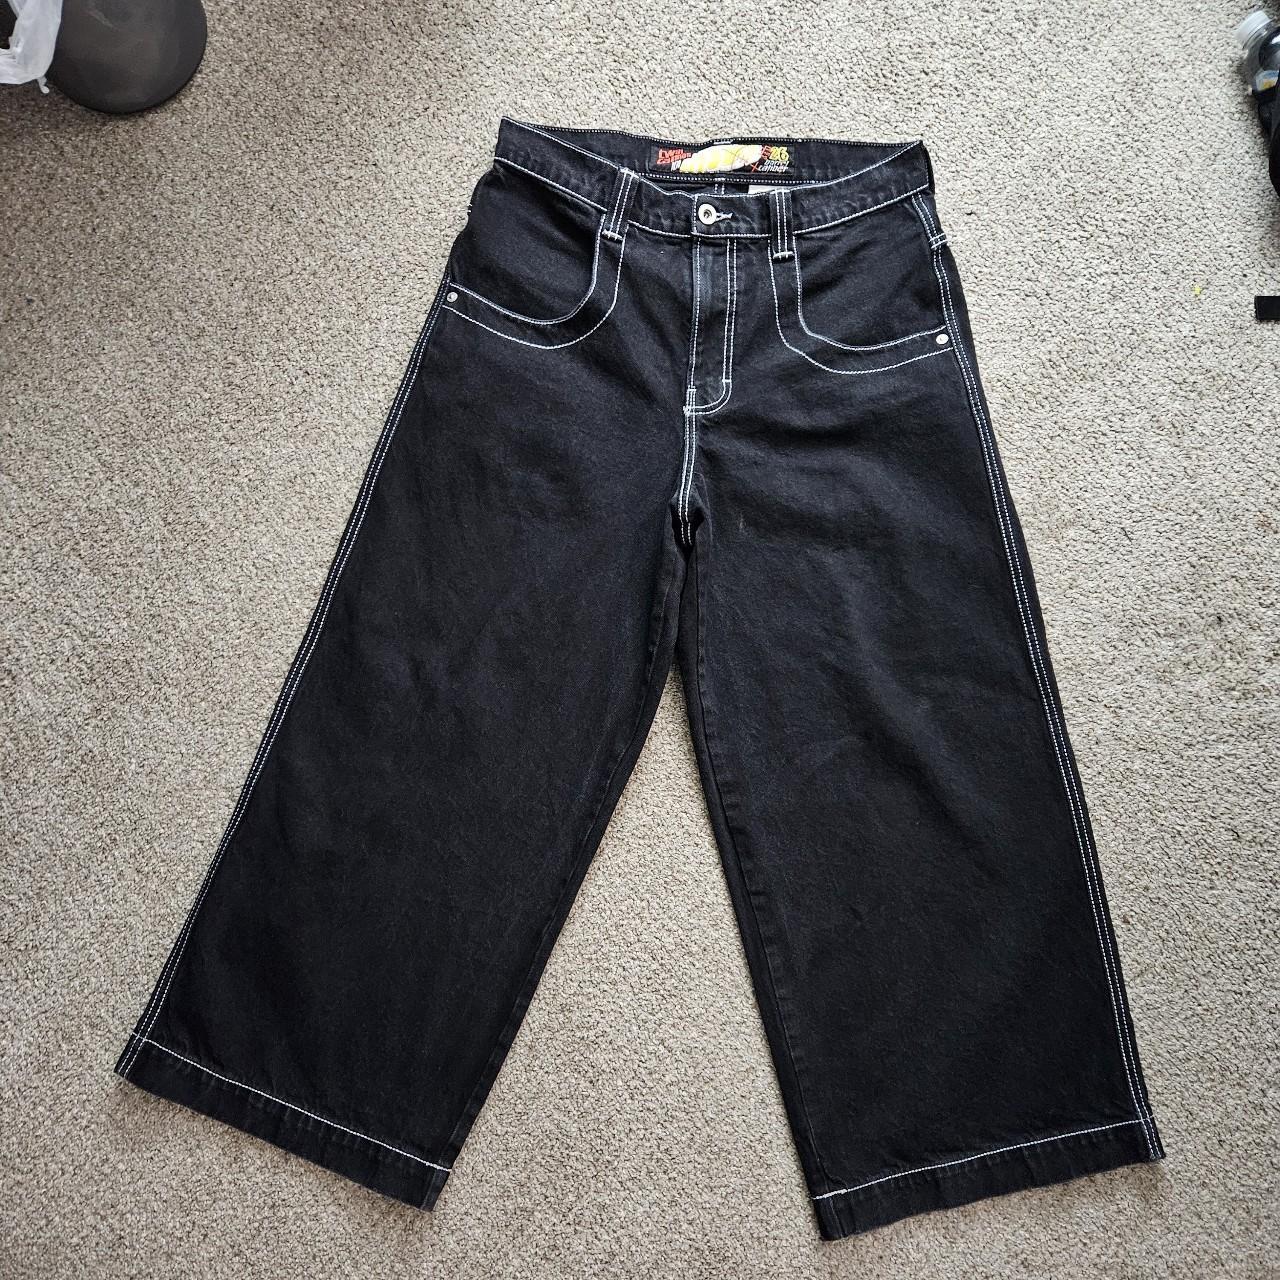 MSG B4 PURCHASE LIKE NEW JNCO TWIN CANNONS these are... - Depop